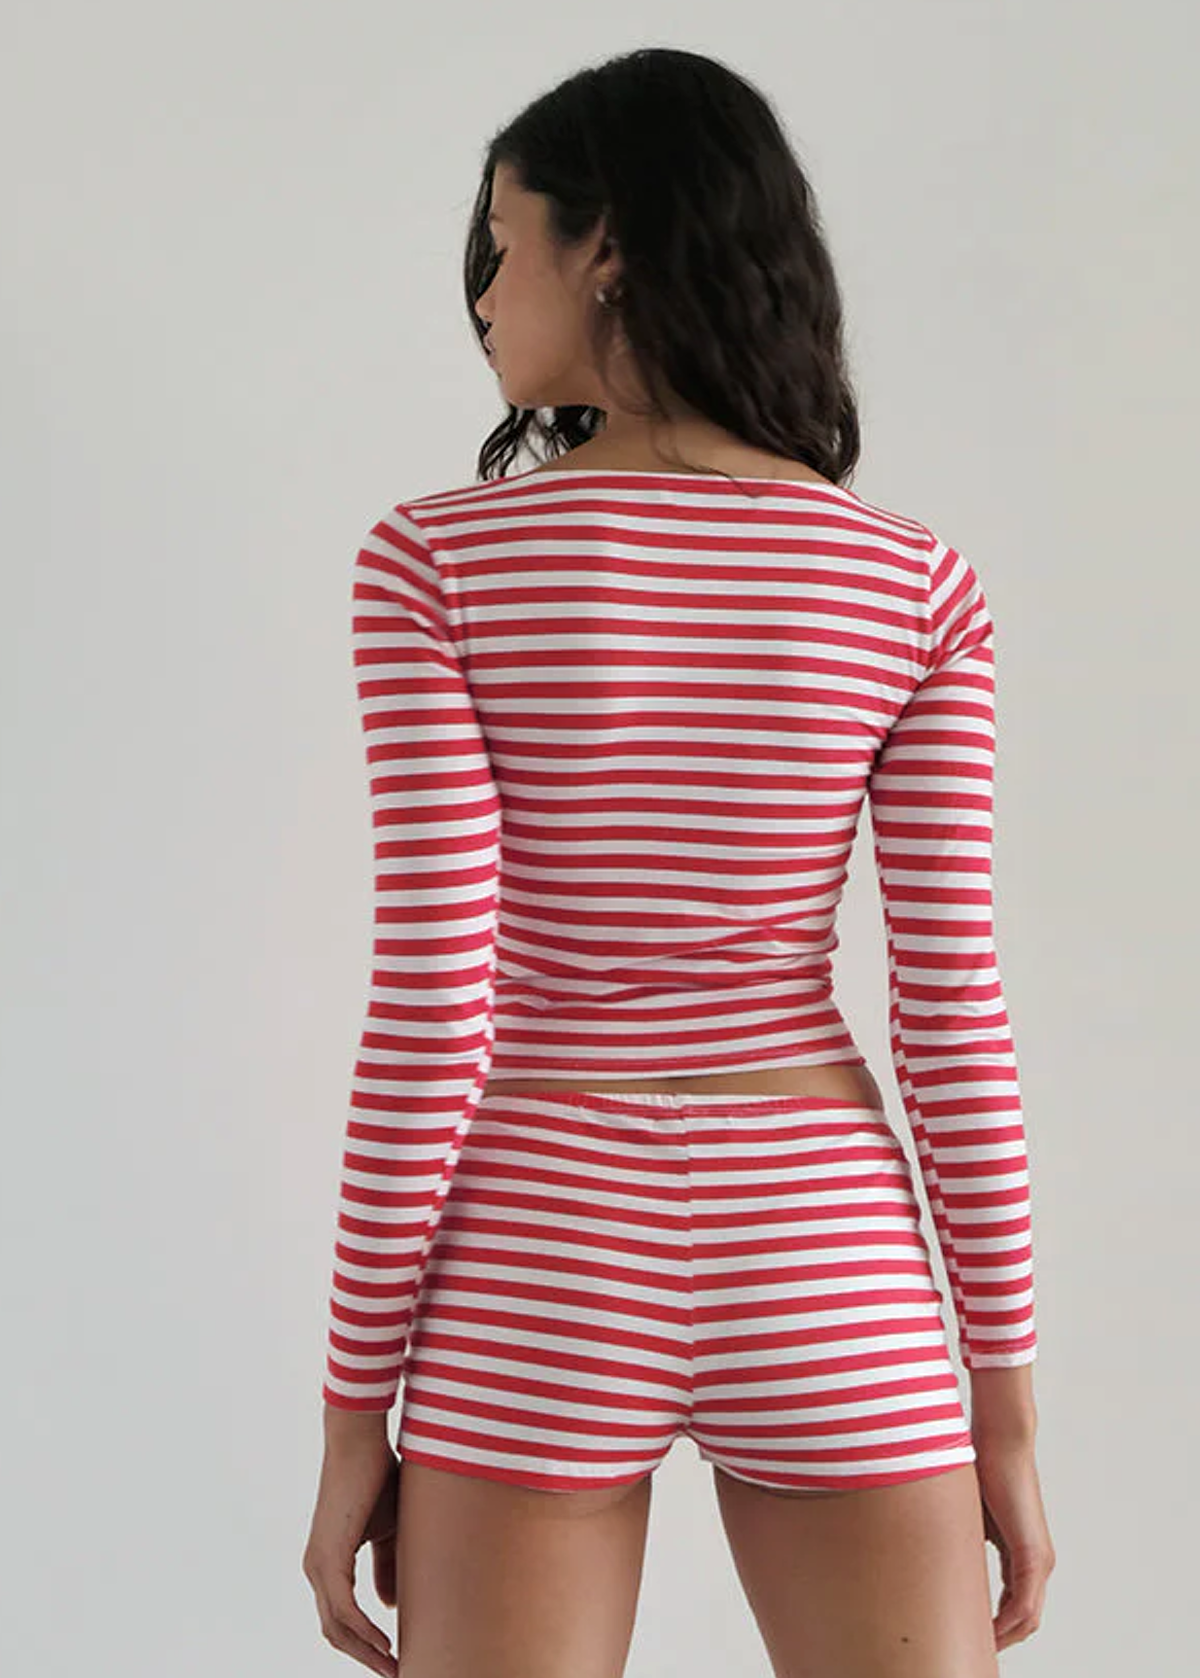 80s style red and white horizontal stripe square neck long sleeve tee by Motel Rocks